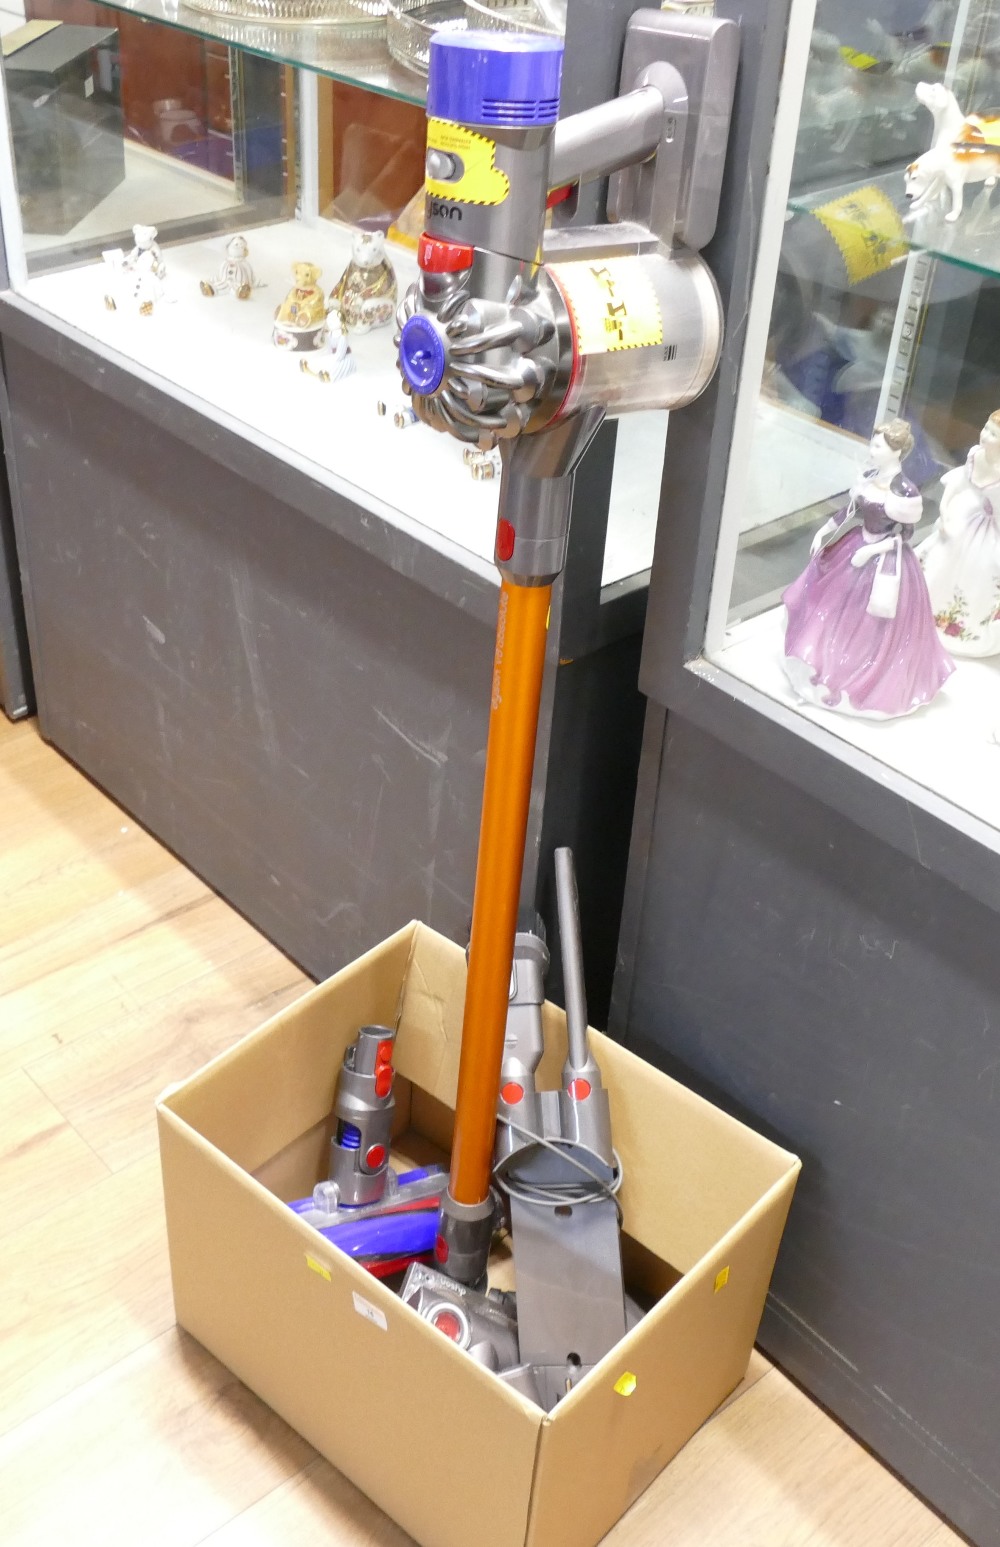 Dyson V8 Absolute vacuum cleaner